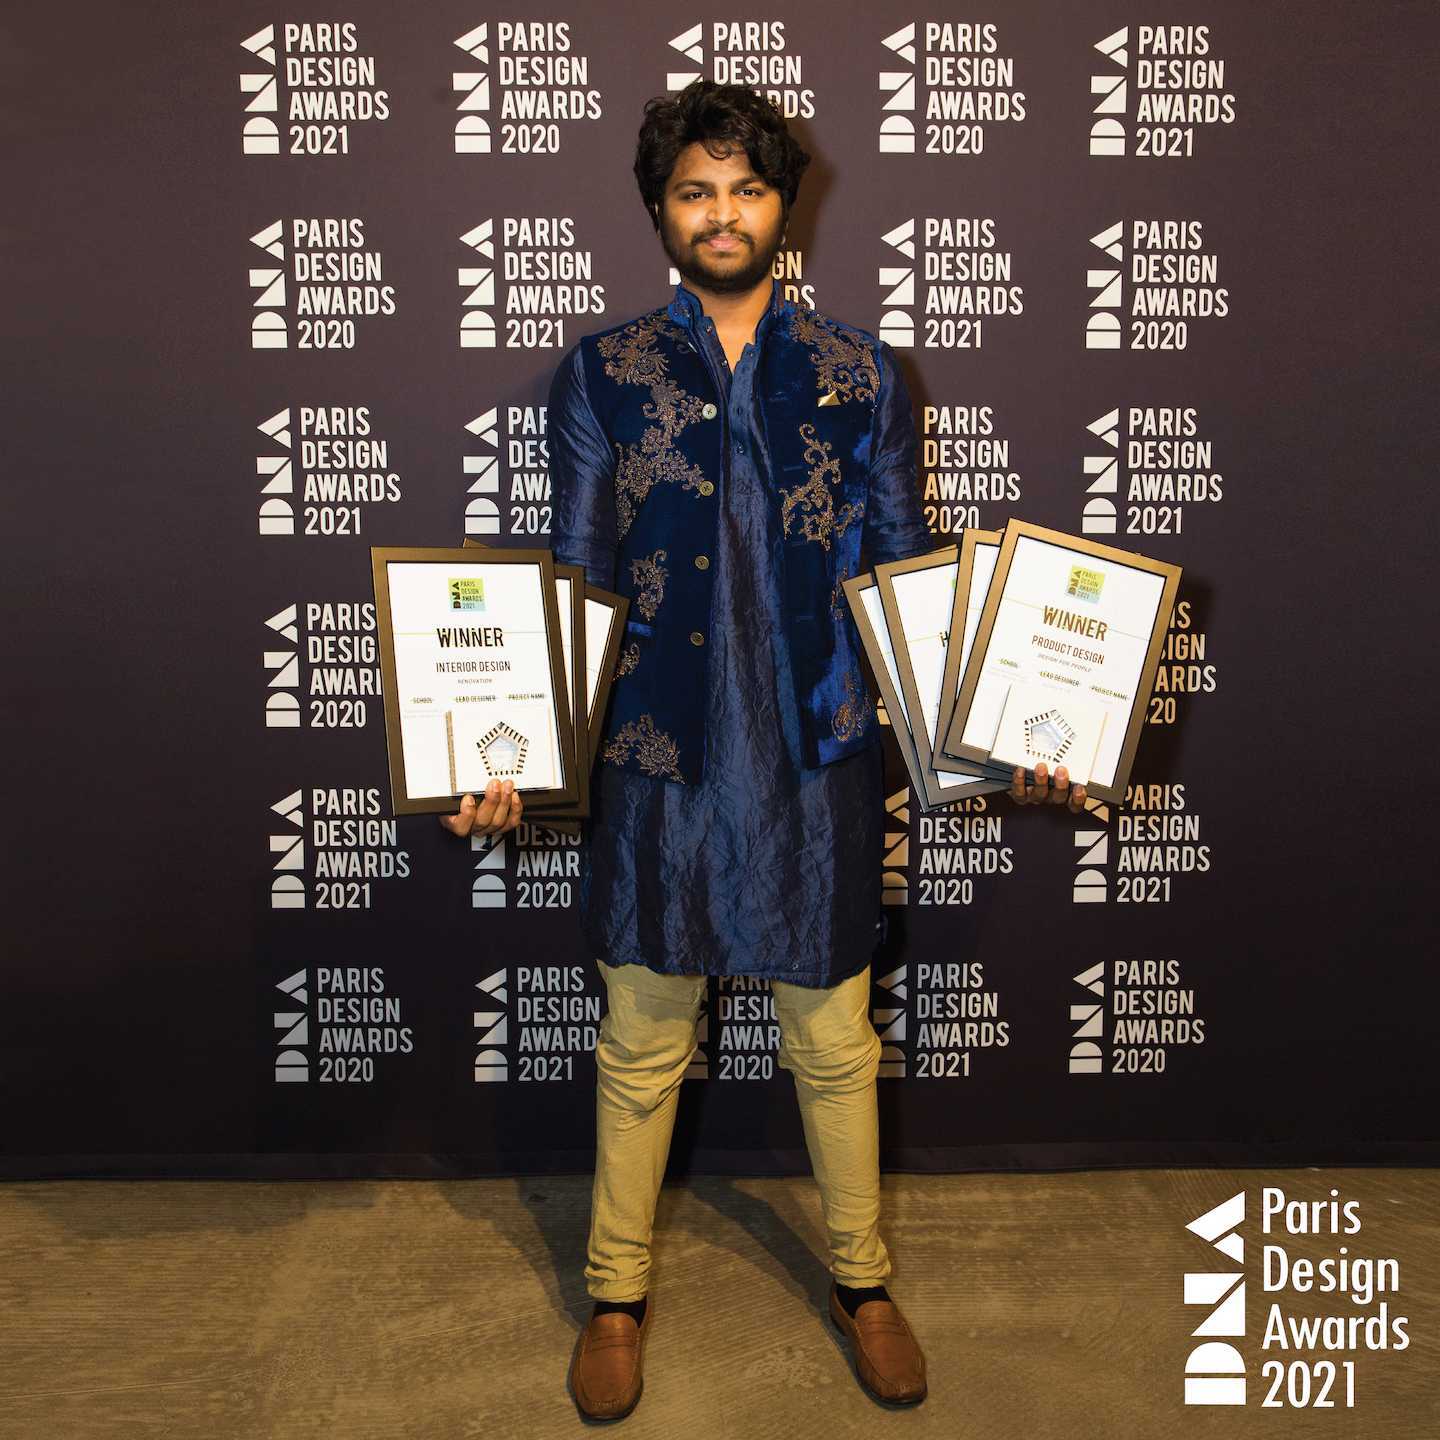 Siddharth's designs have been awarded at various national and international platforms